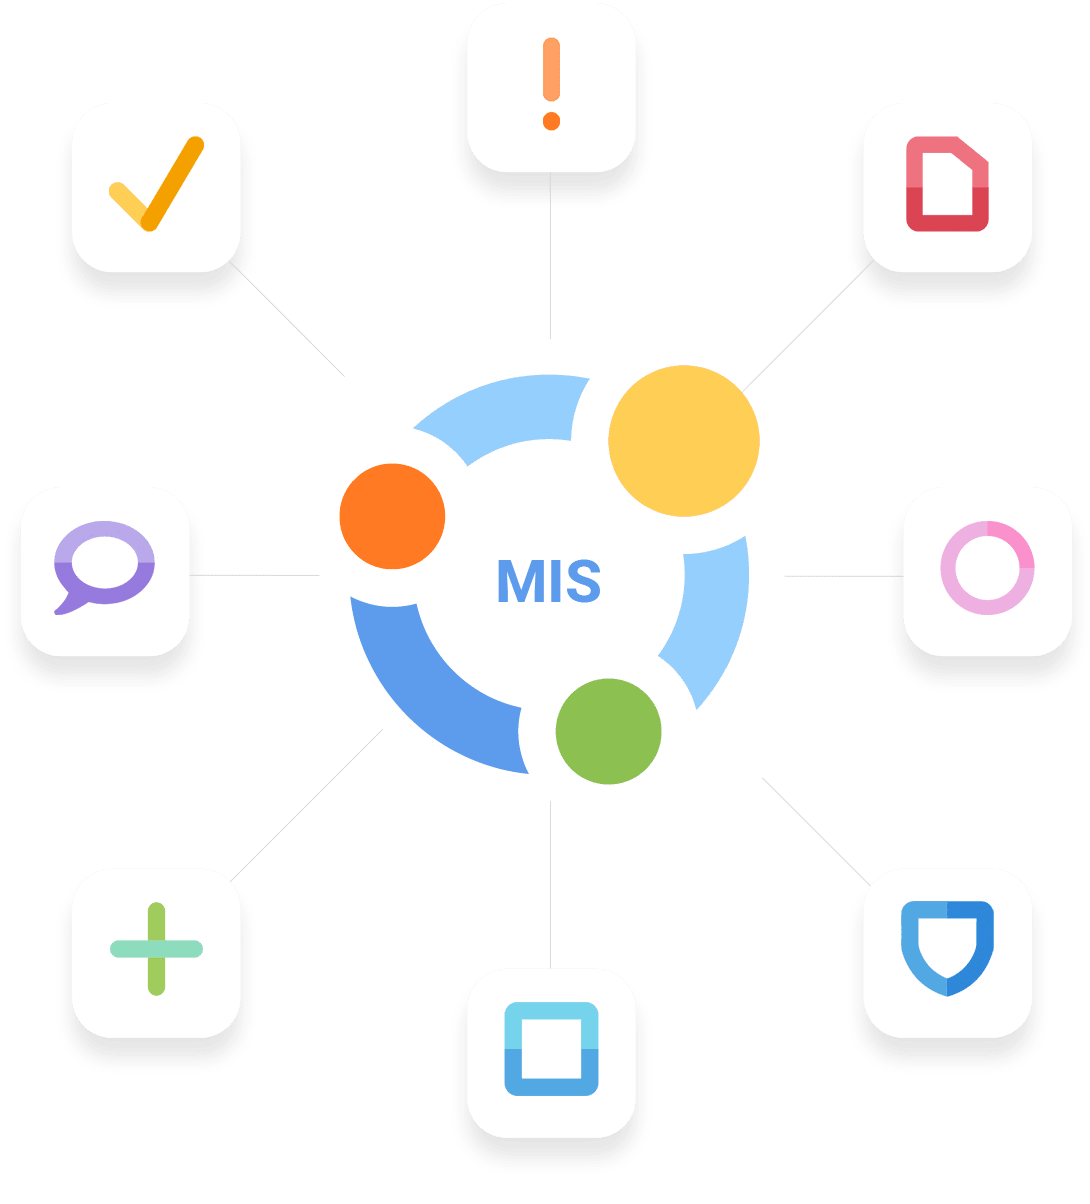 Image of MIS logo surrounded by Satchel One's other app logos